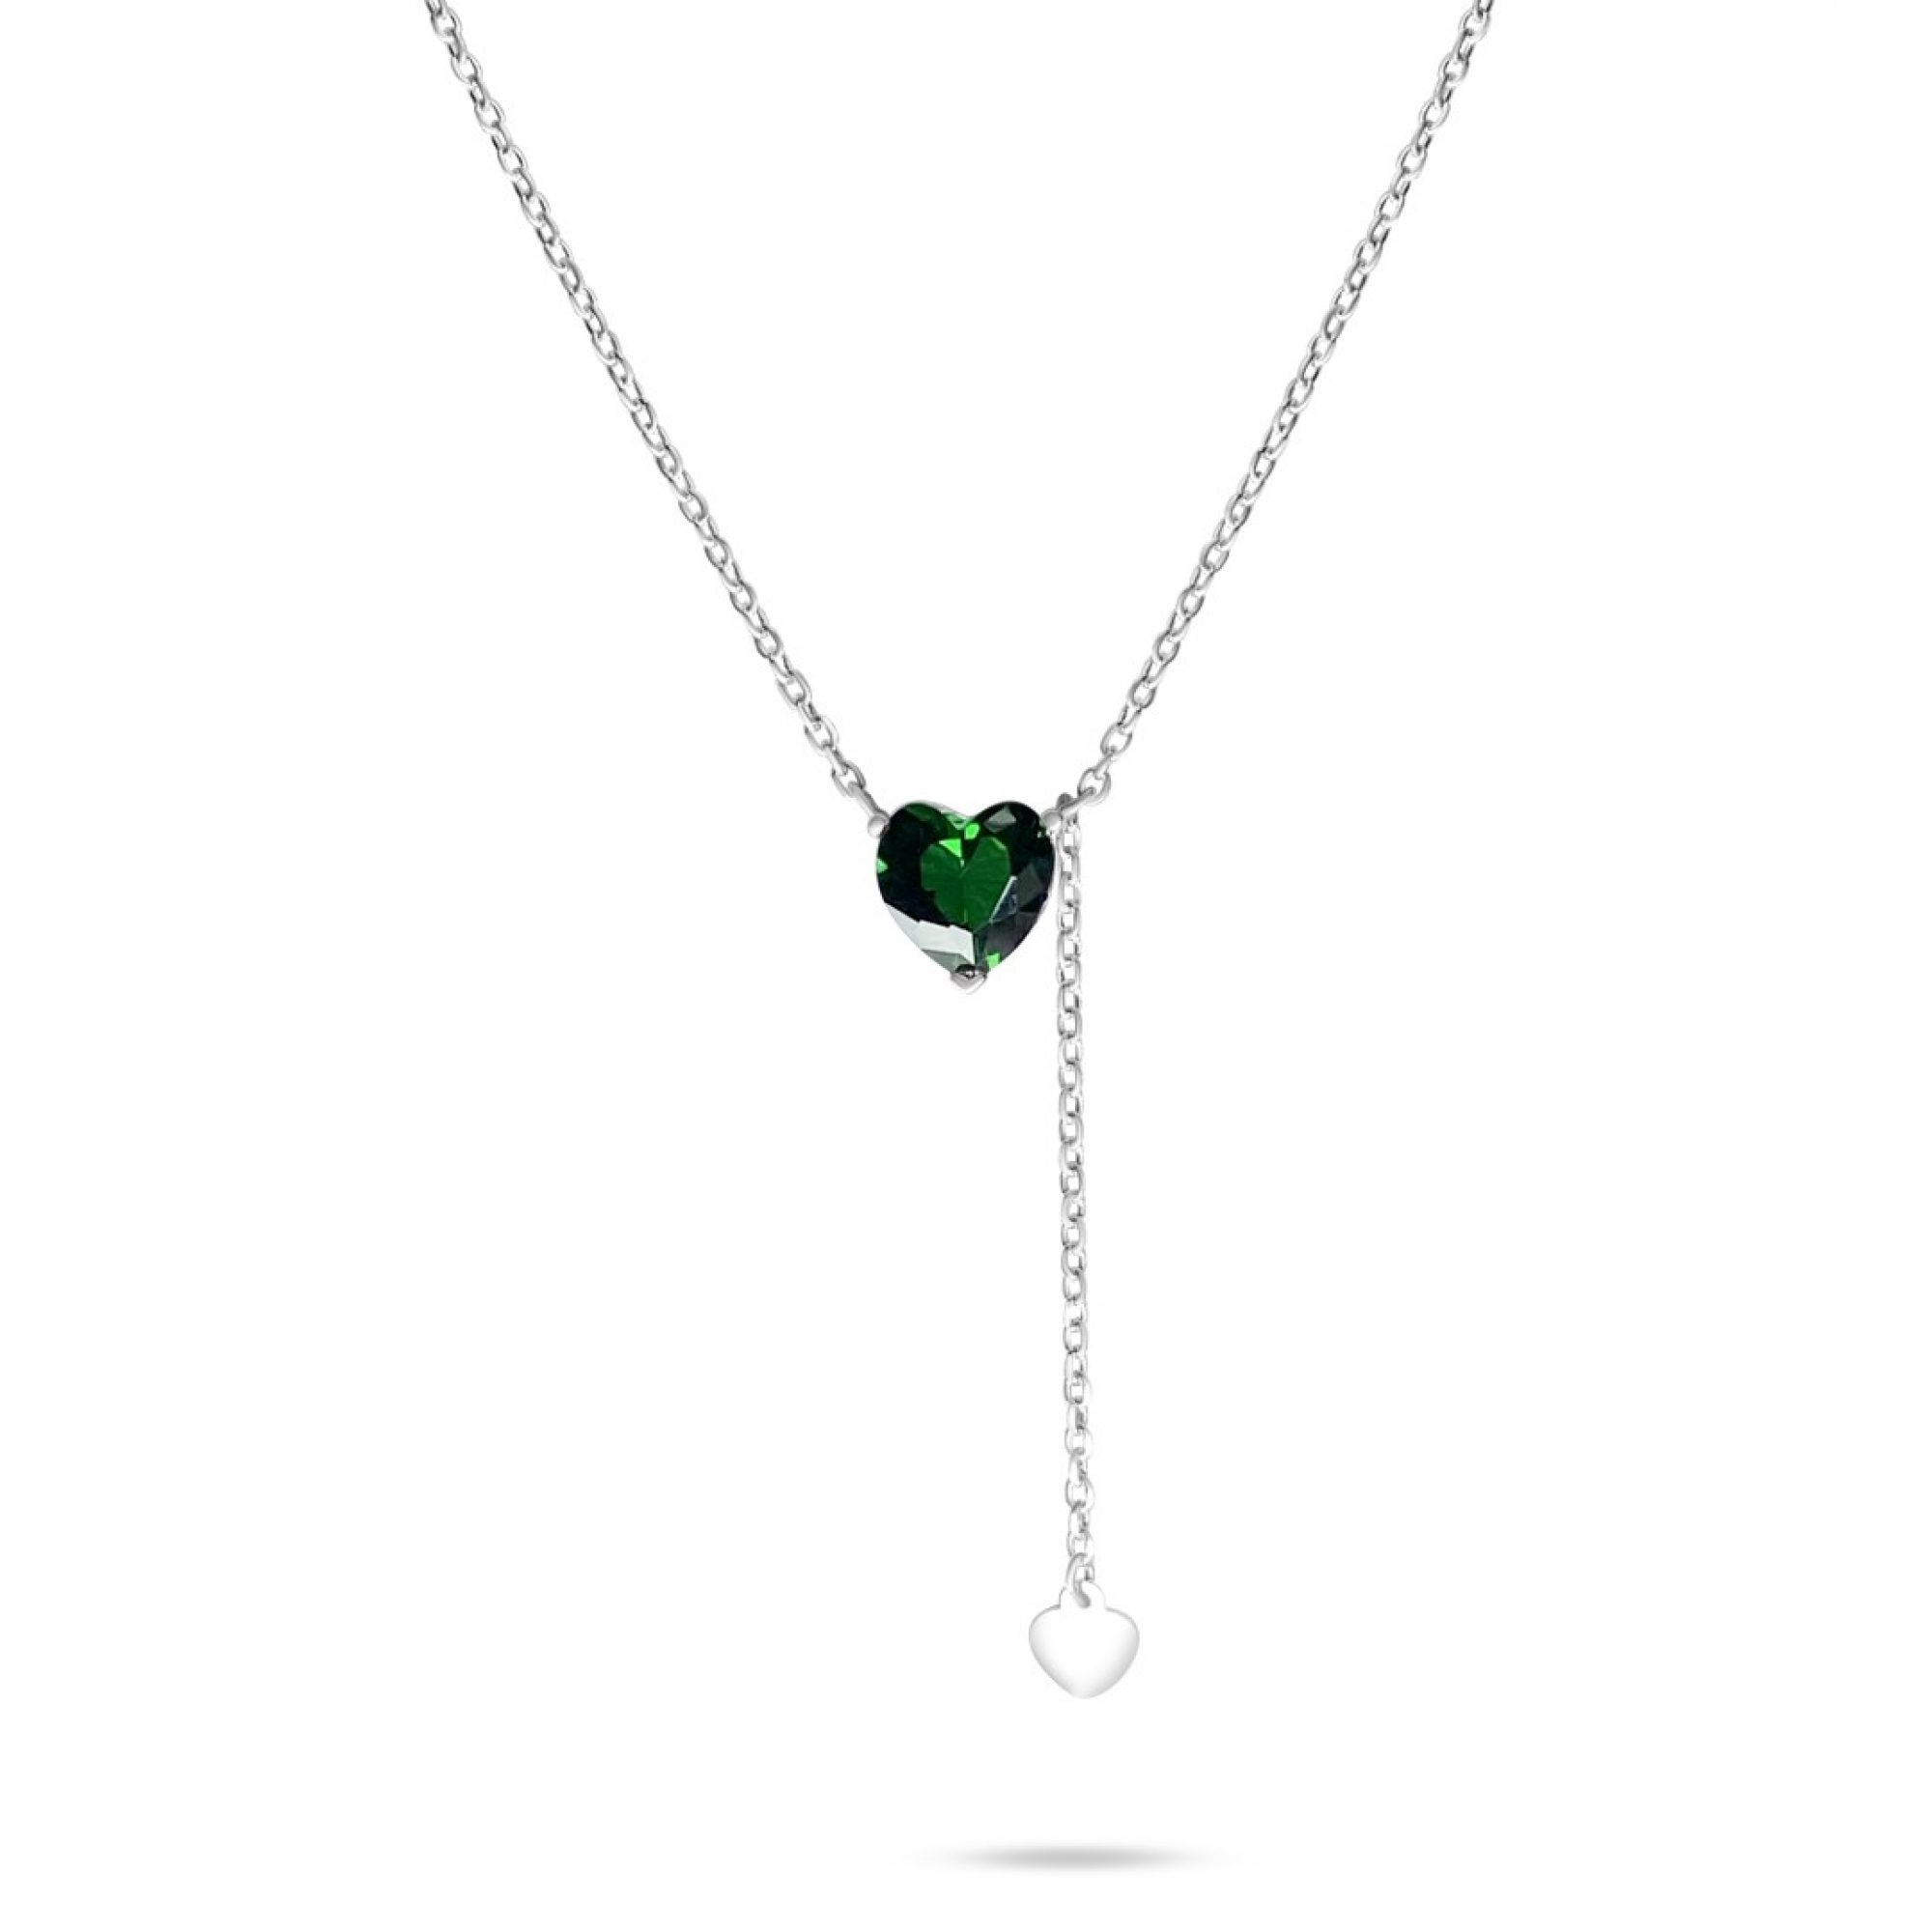 Heart necklace with emerald stone